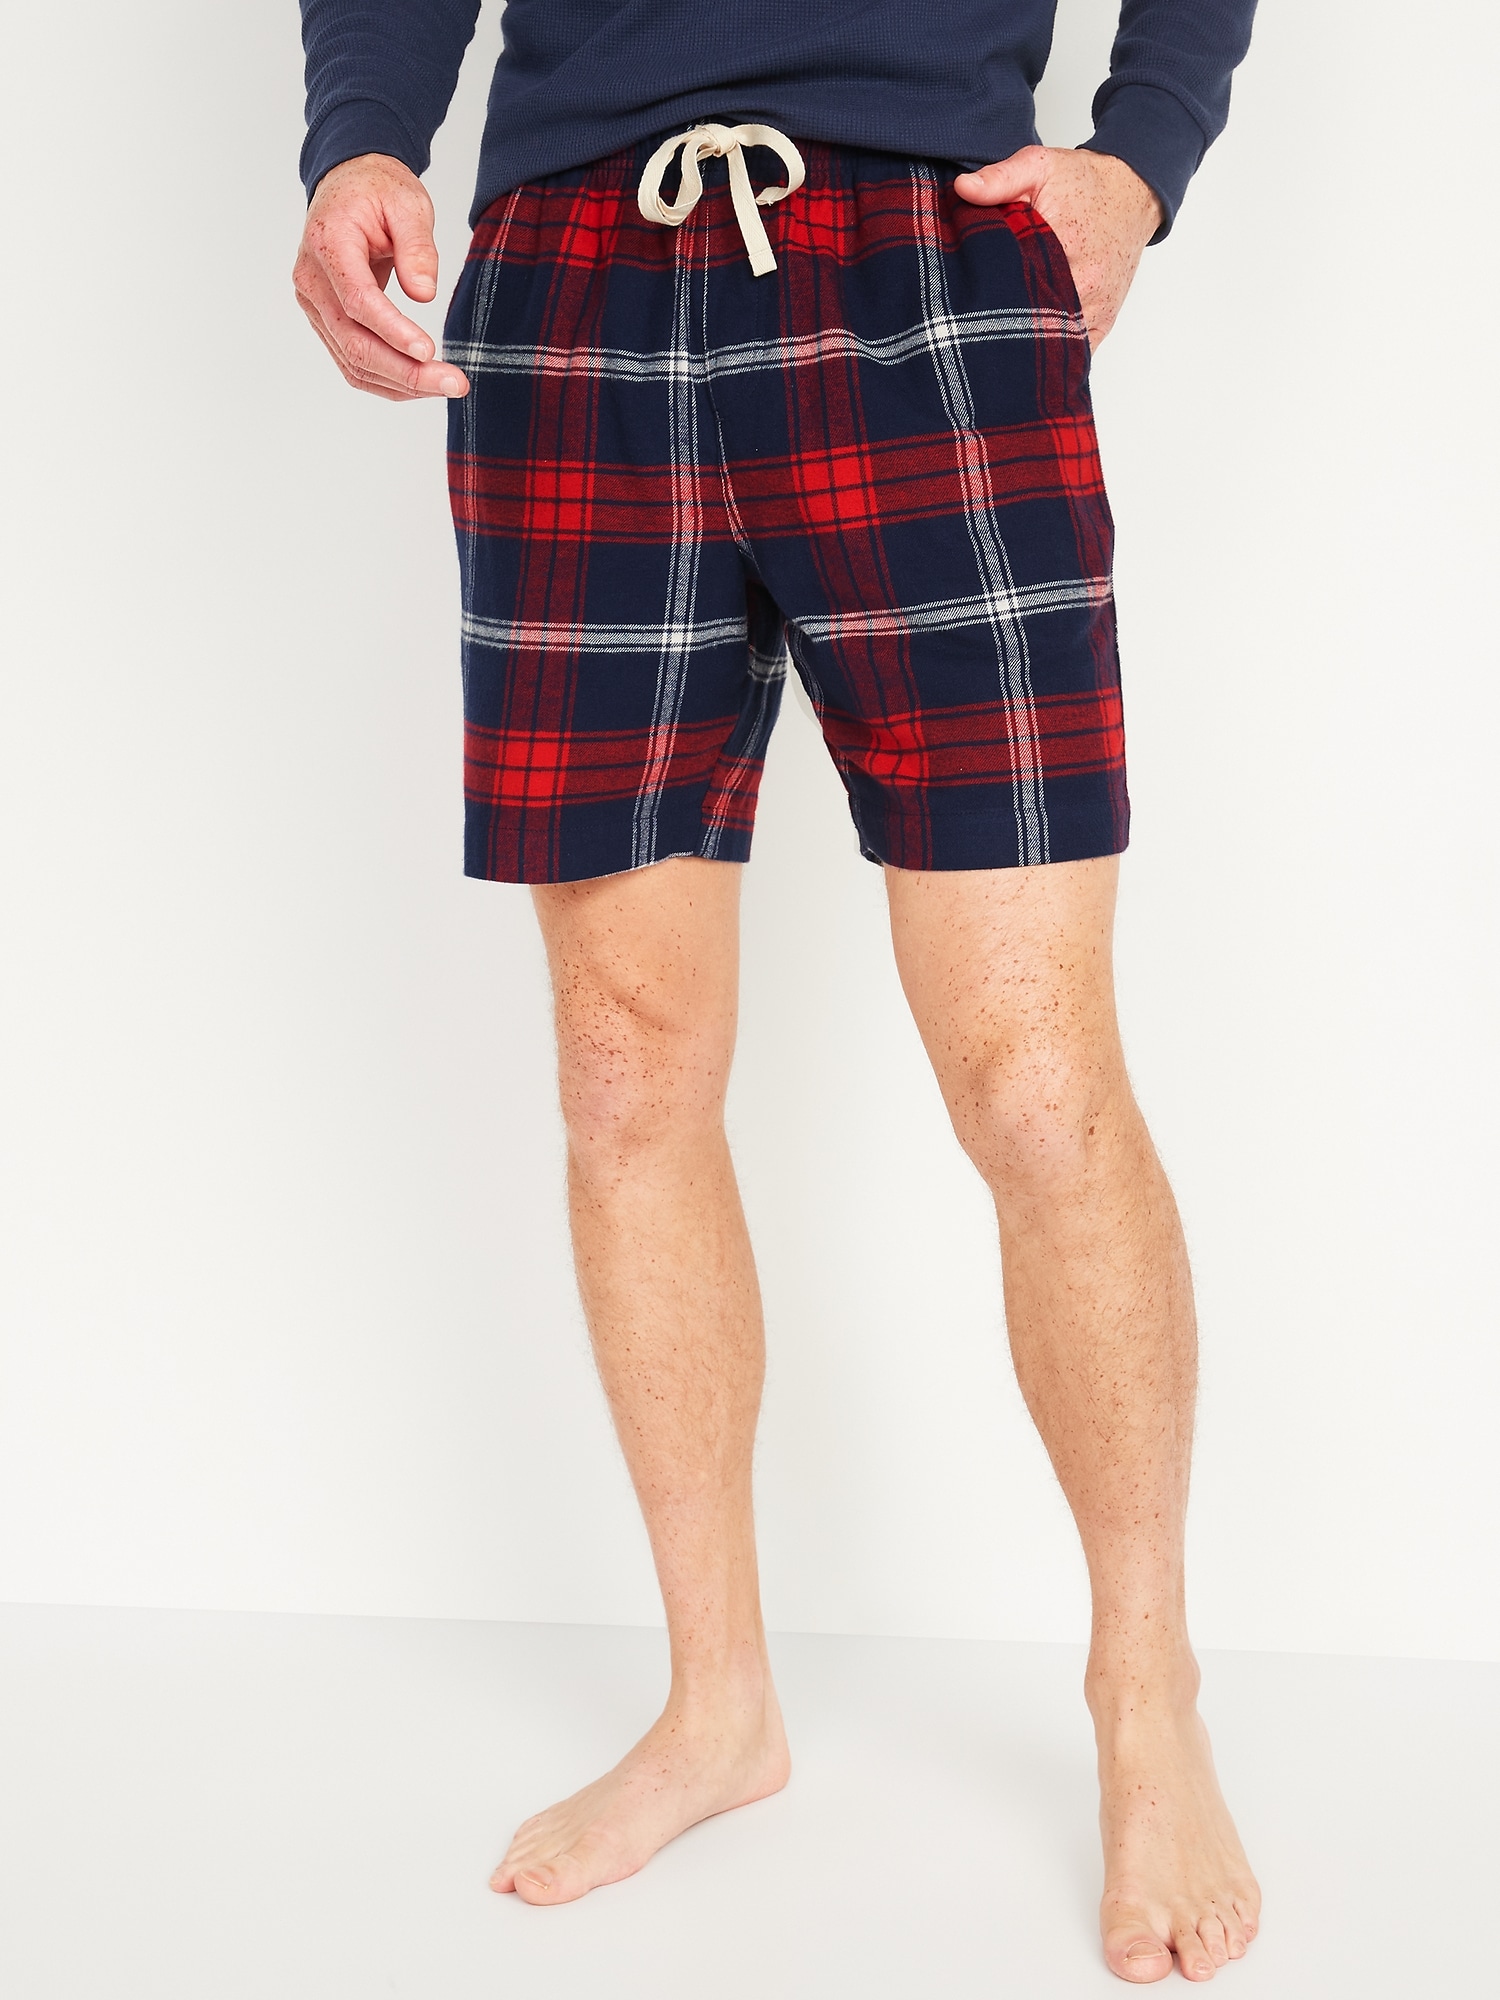 Old Navy Matching Flannel Pajama Shorts for Men -- 7-inch inseam